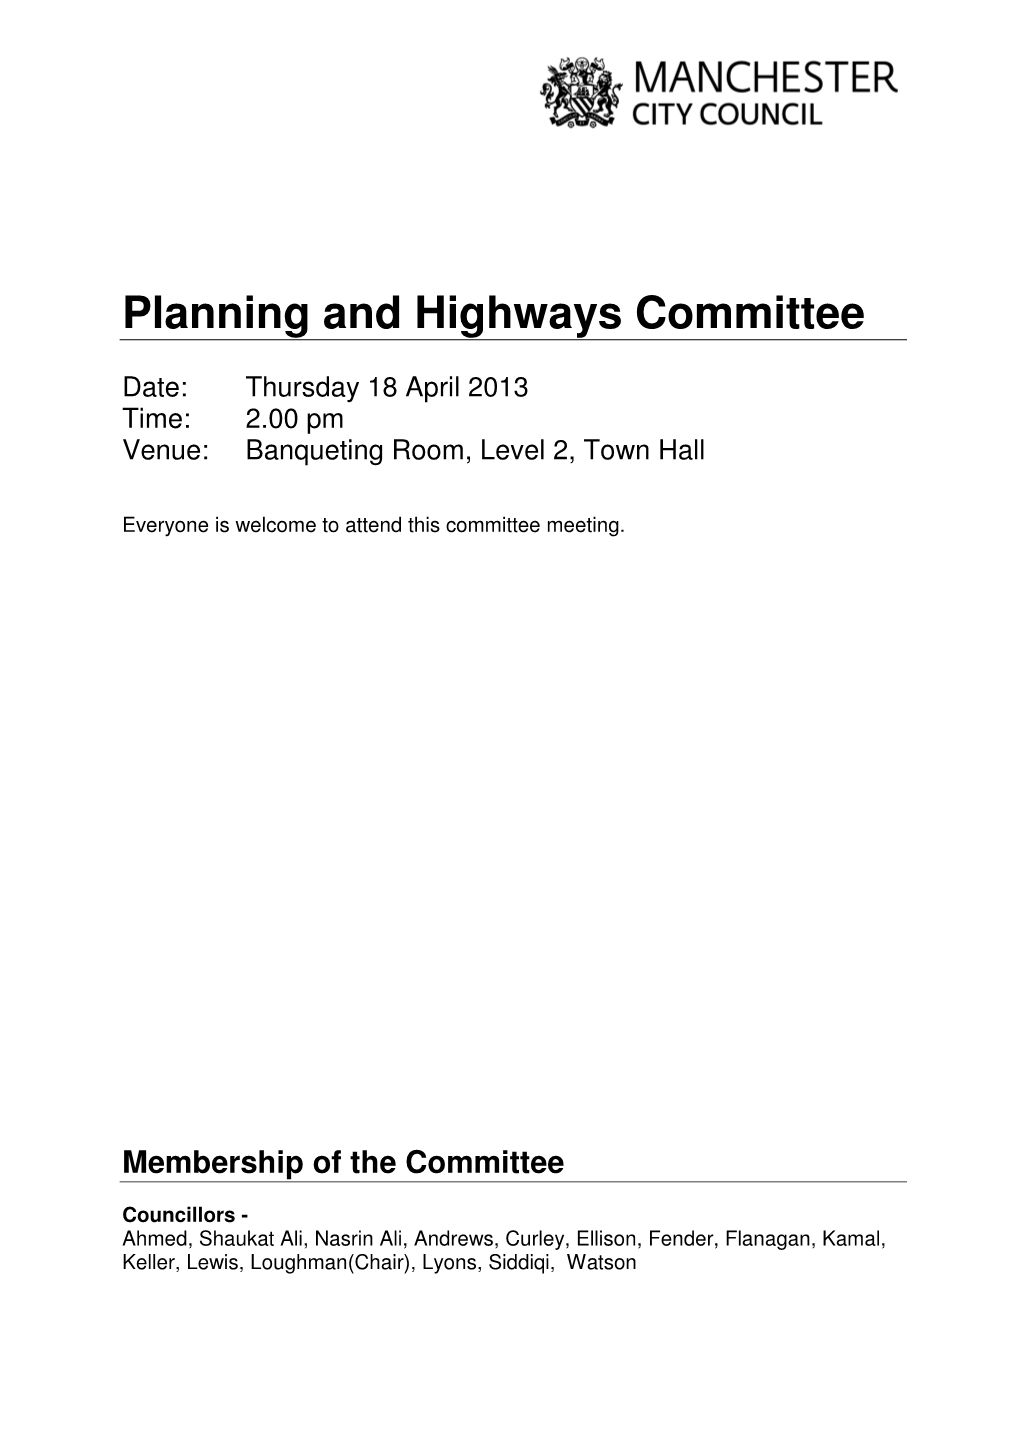 Agenda for Planning and Highways Committee